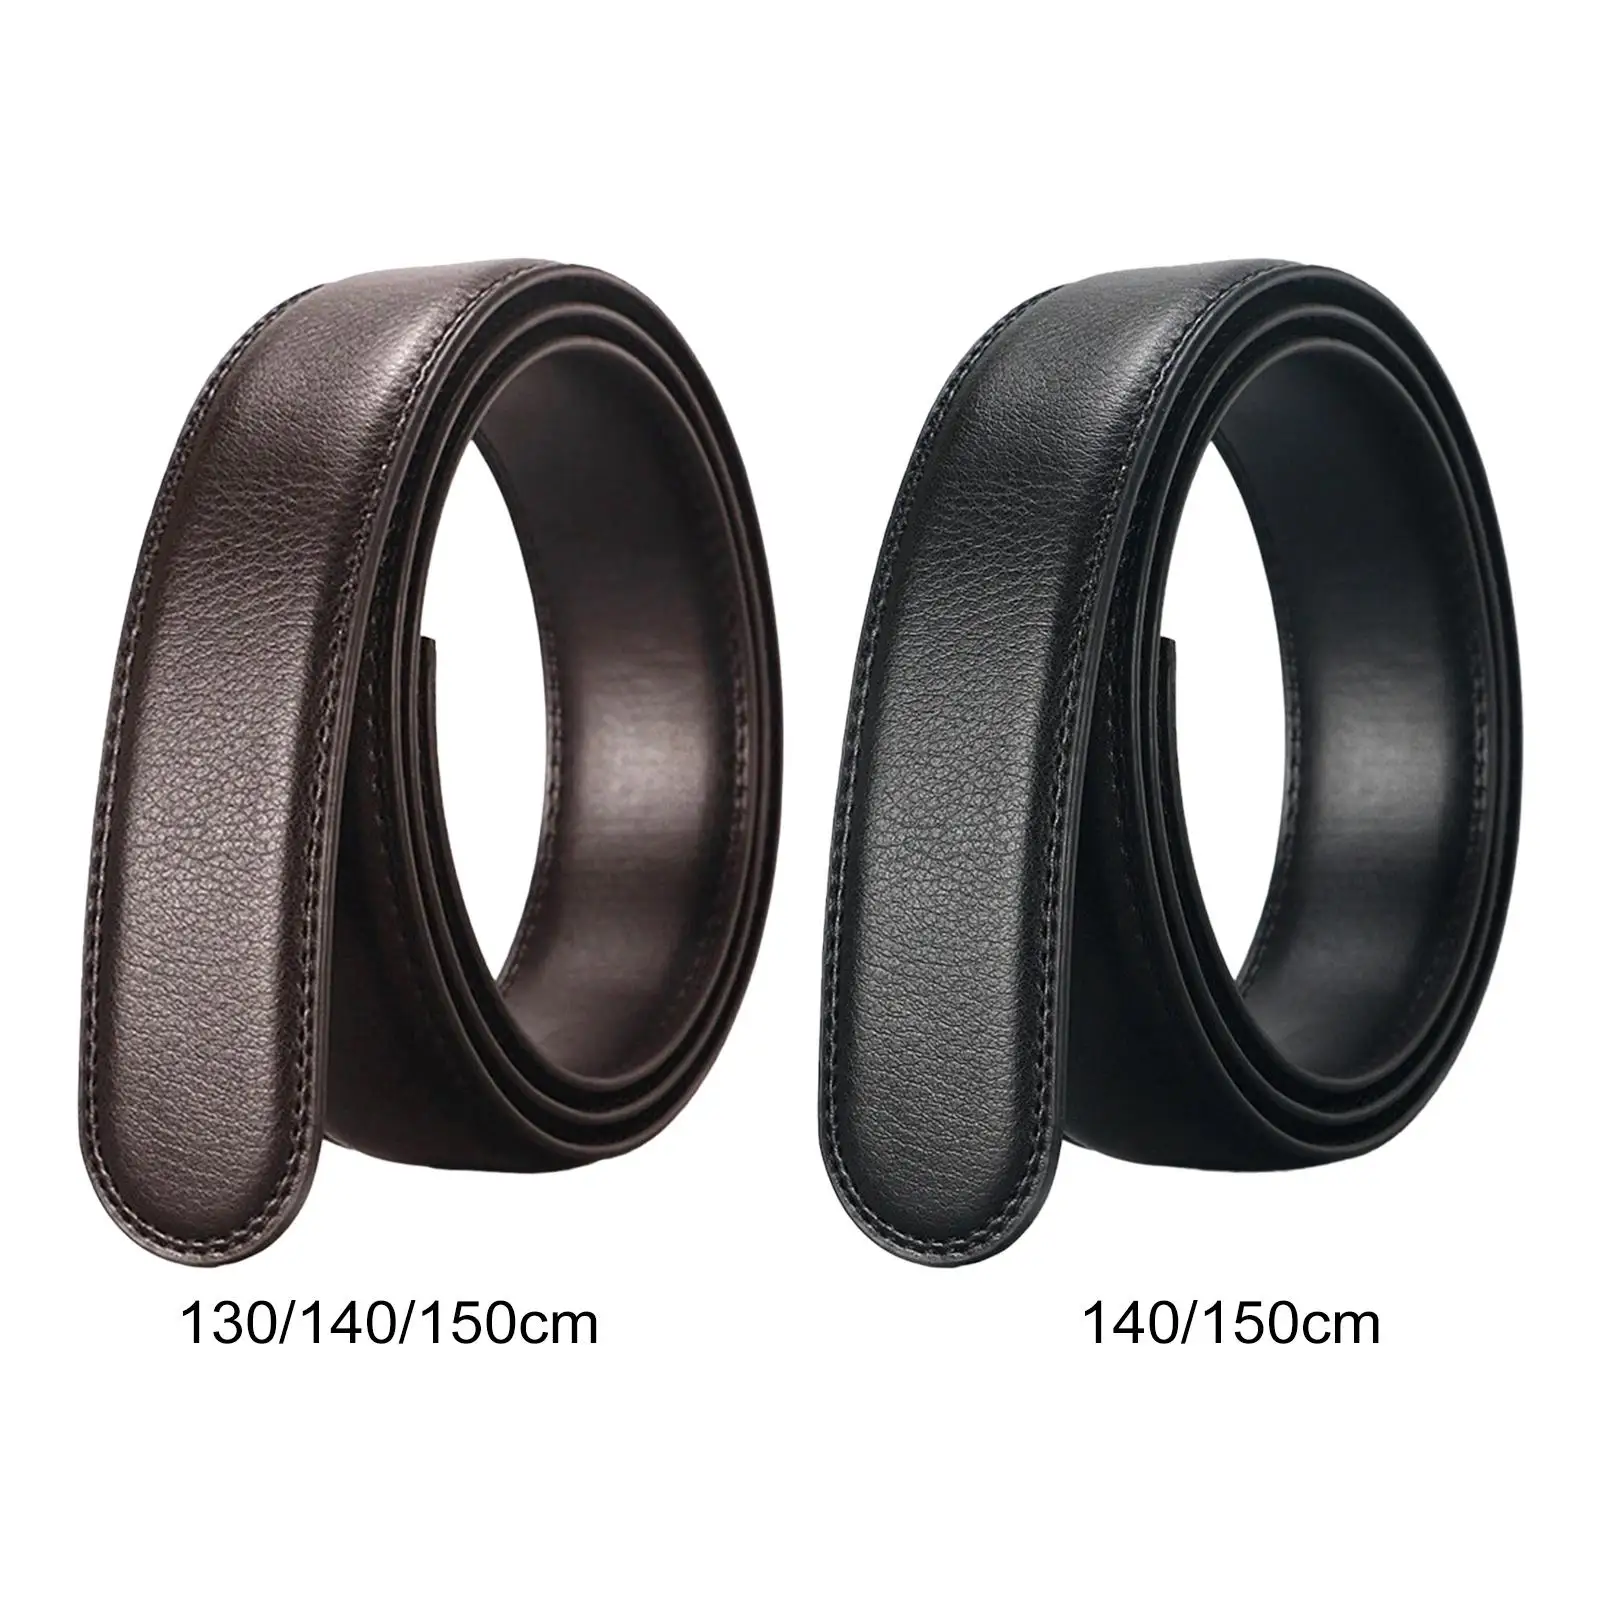 Automatic Belt No Buckle 3.5cm Trendy Formal Dress Belt Ratchet Belt Strap Only for Shopping Street Business Events Party Jeans